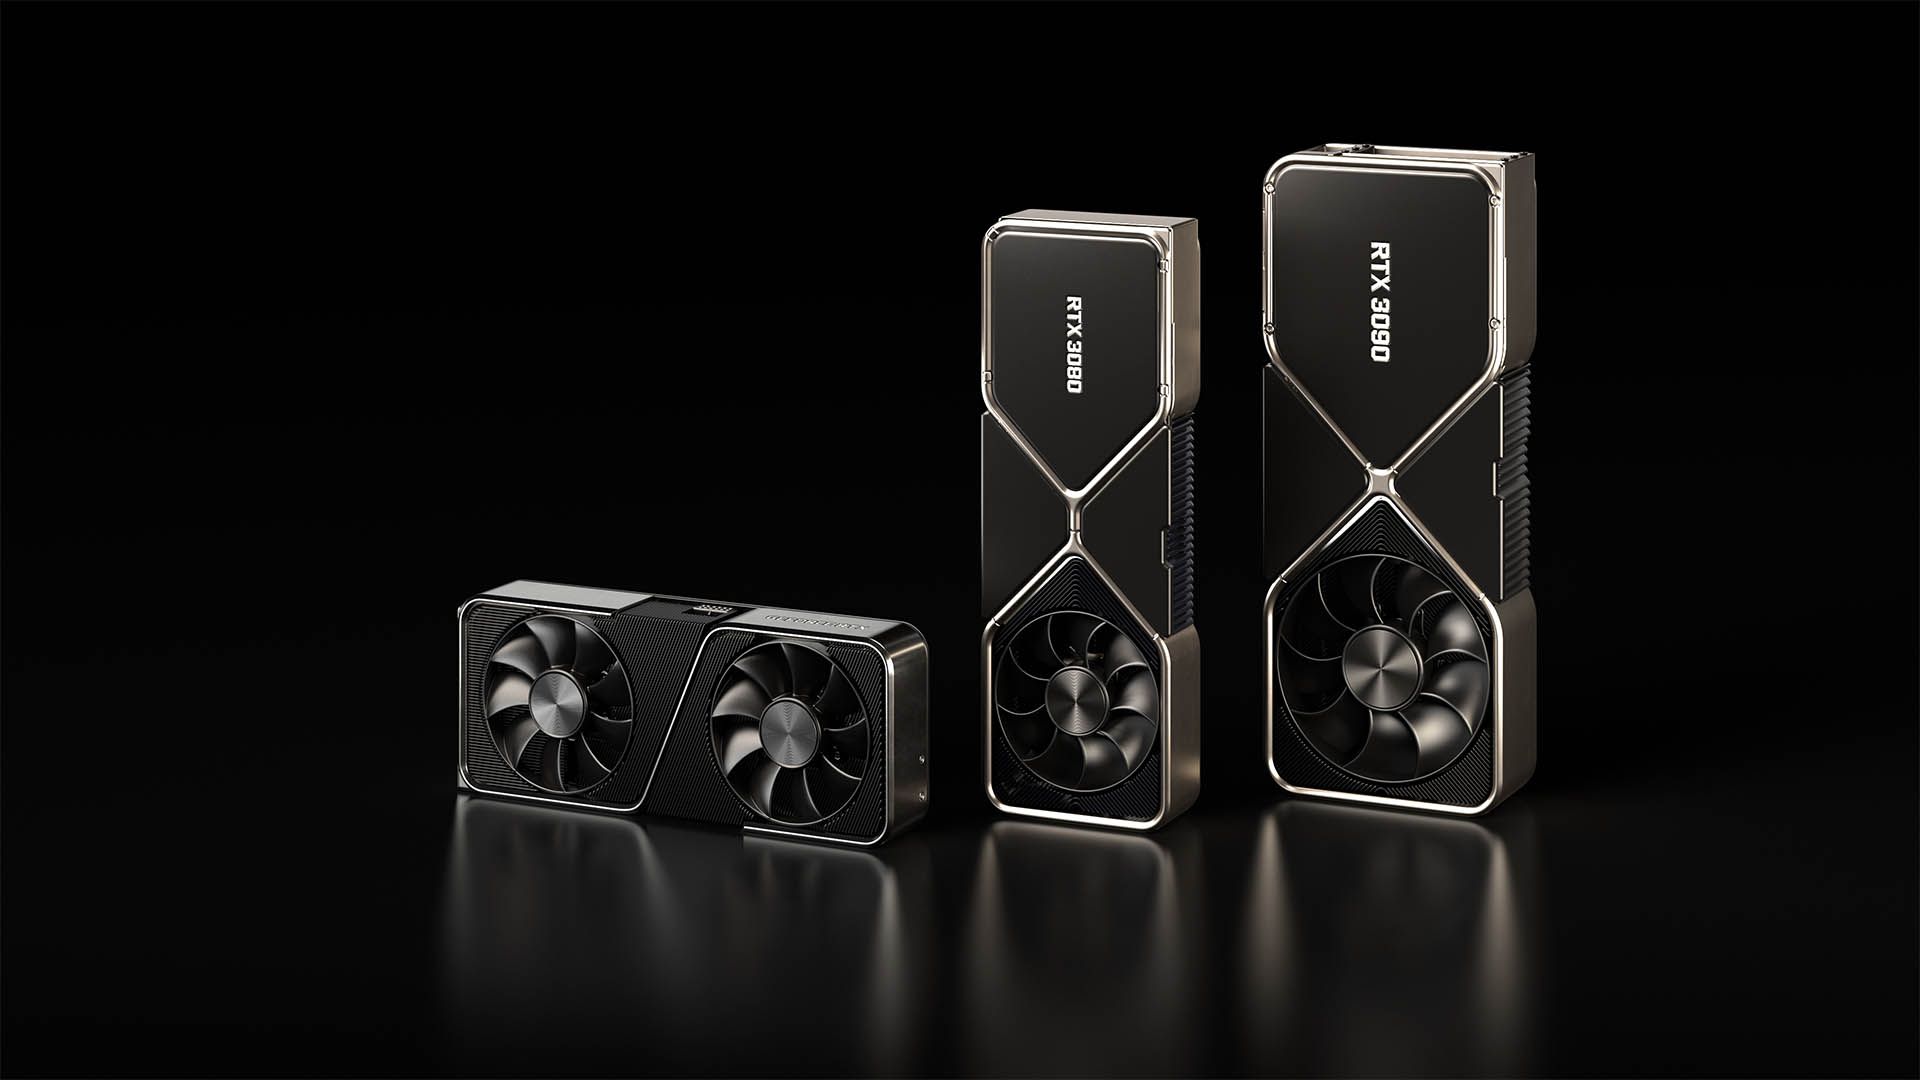 Nvidia puts a hold on RTX 3080 and RTX 3090 Founders Edition sales from its webstore